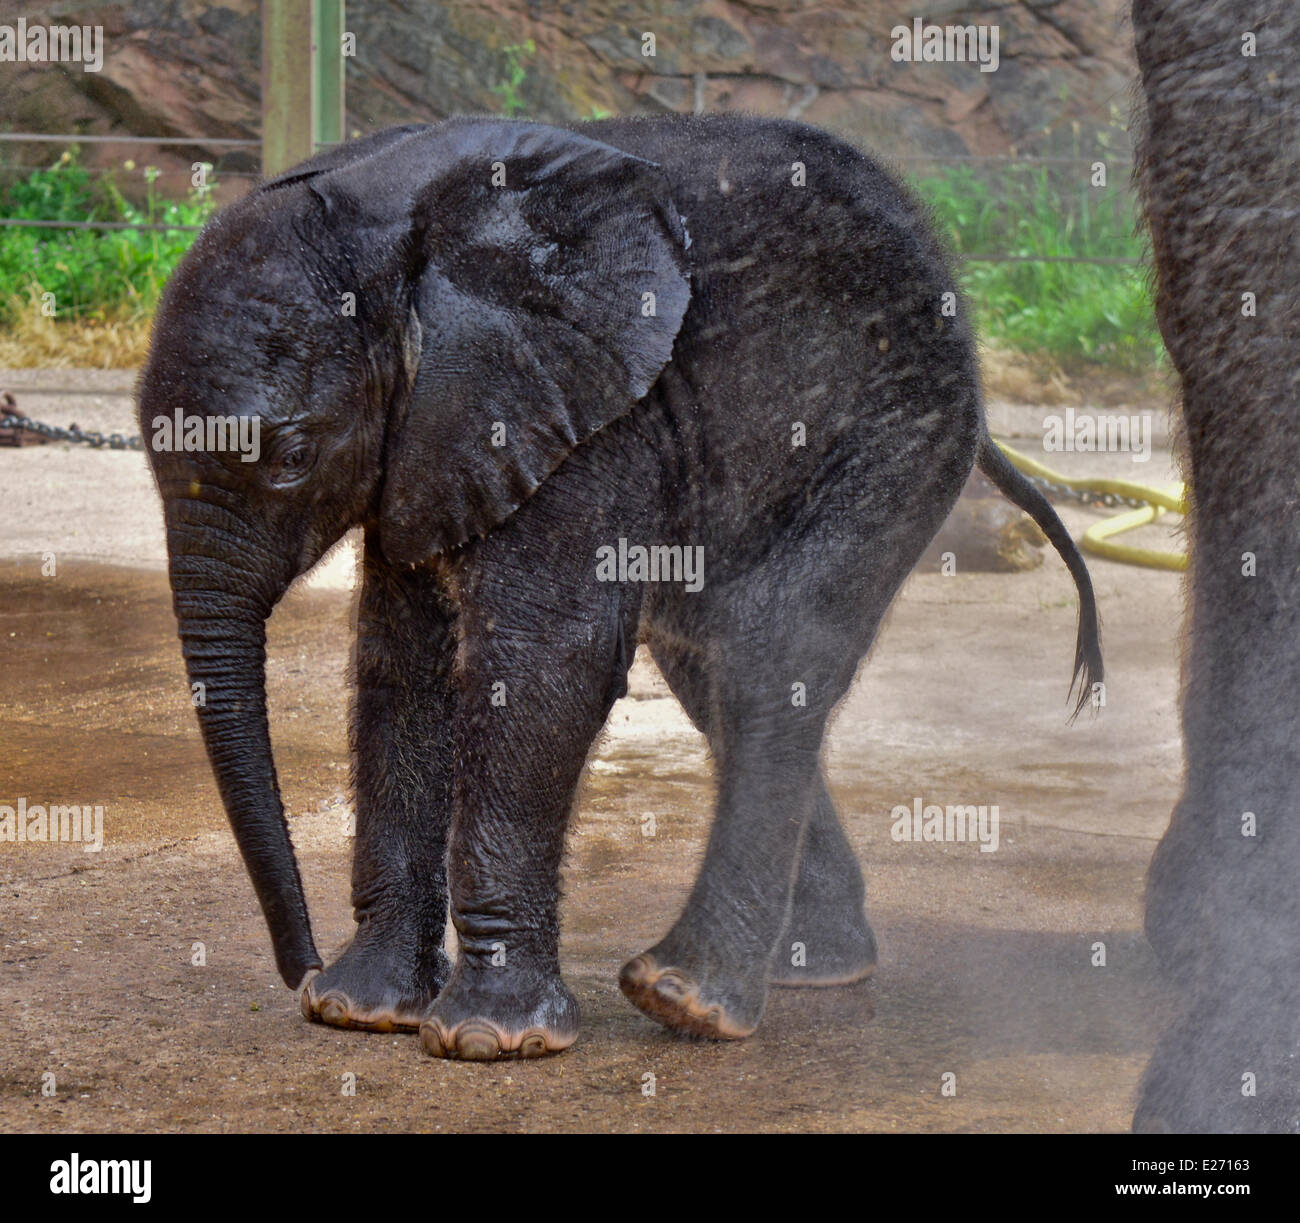 Bewdley, UK. 16th June, 2014. 'Sutton', the new baby elephant at West Midlands Safari Park, and her mother get a soaking. Sutton was named after Stephen Sutton, the teenage cancer sufferer who died earlier this year. Stephen visited the elephant's mother 'Five' earlier this year. The meeting was one of the events on his bucket list. The zoo had given the public the vote to decide the name of the five week old baby elephant - both 'Stephen' and 'Sutton' were equally popular. The Zoo decided on Sutton.  Credit:  jules annan/Alamy Live News Stock Photo